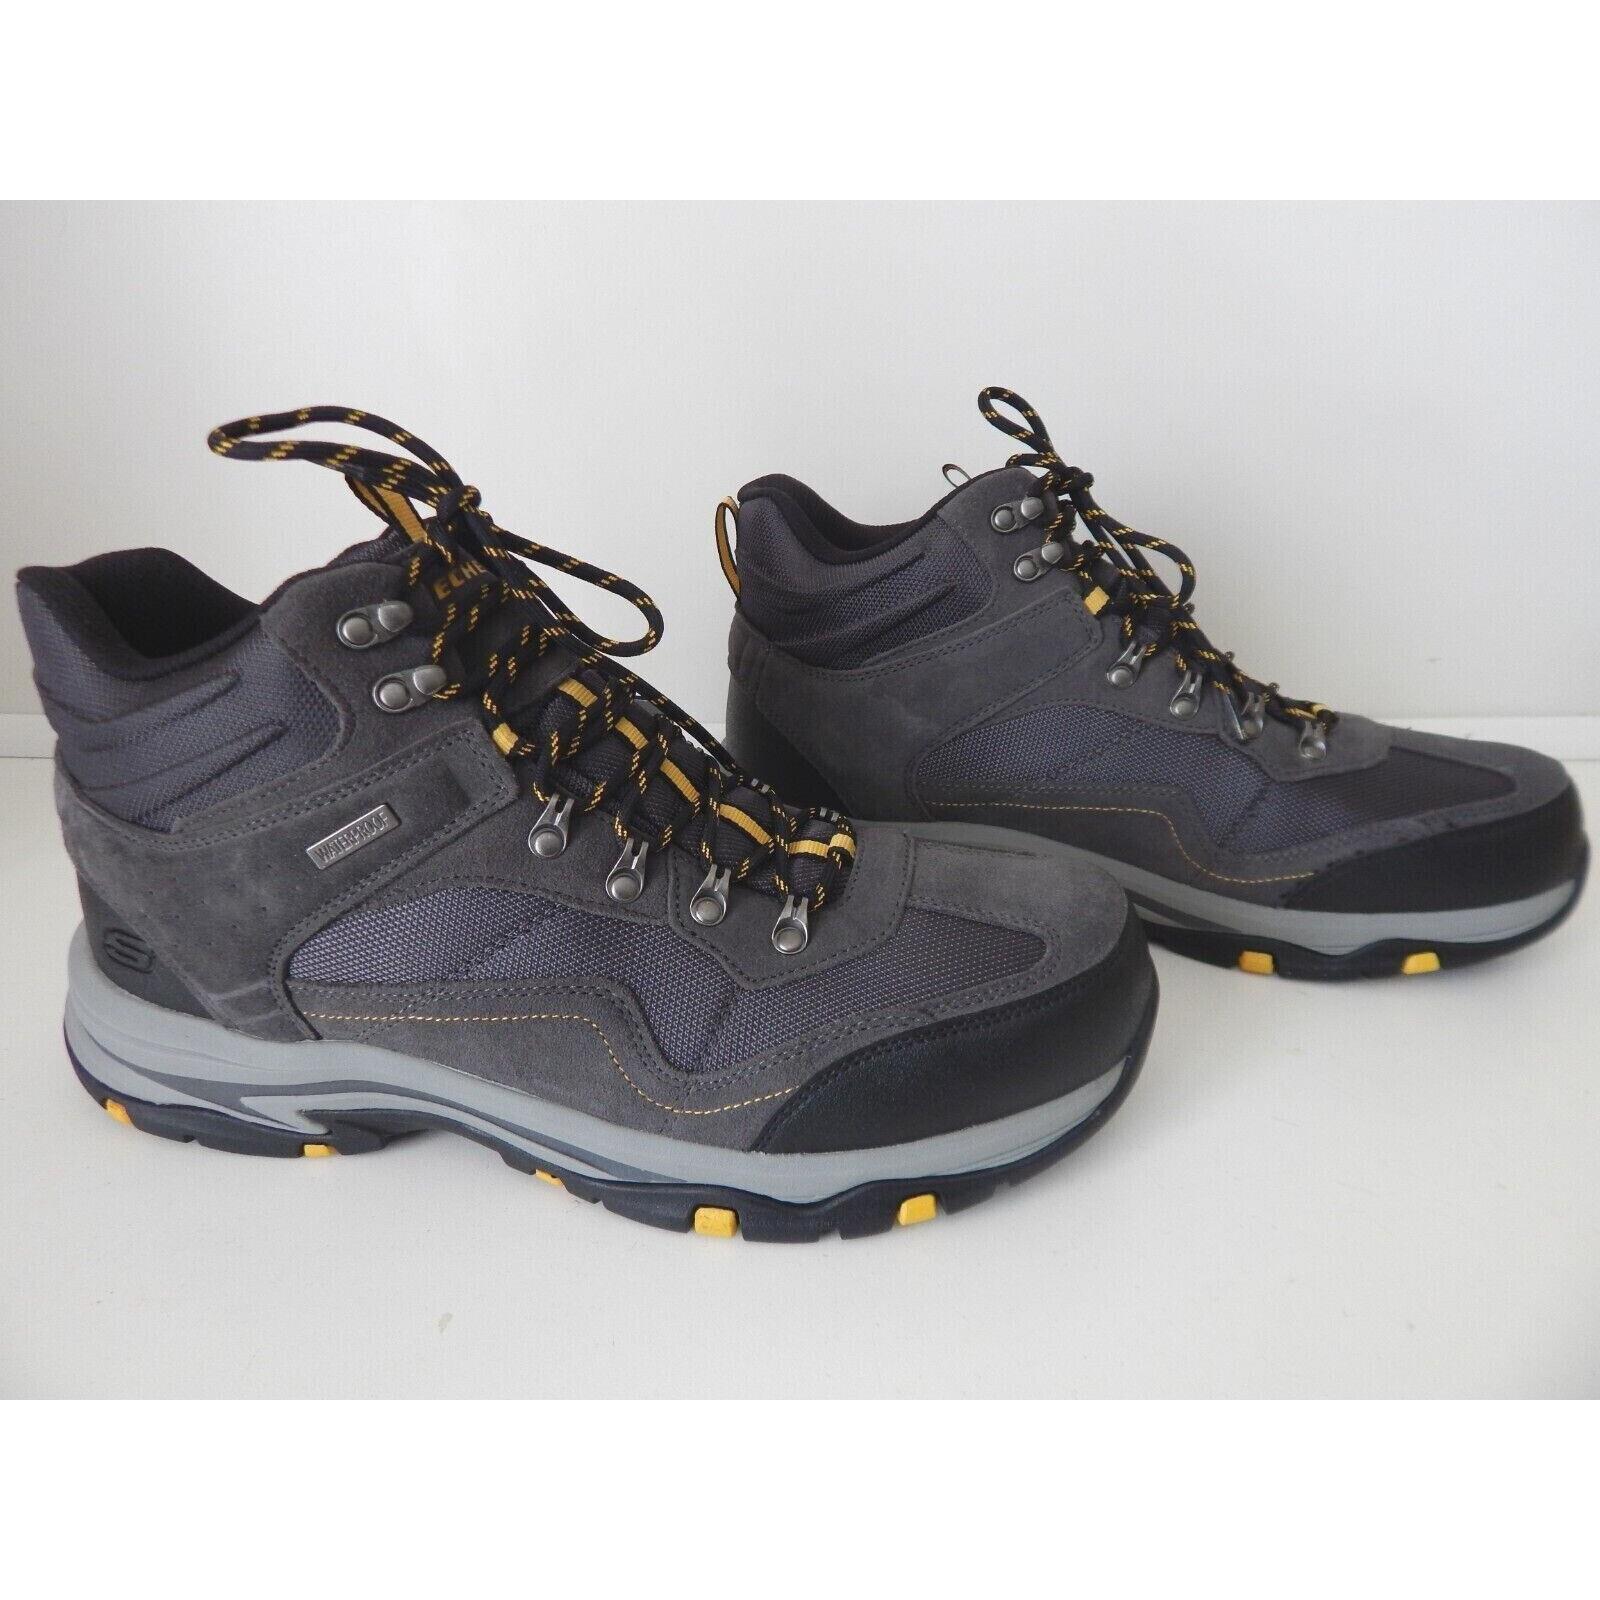 Skechers shoes Trego Pacifico - Gray 0